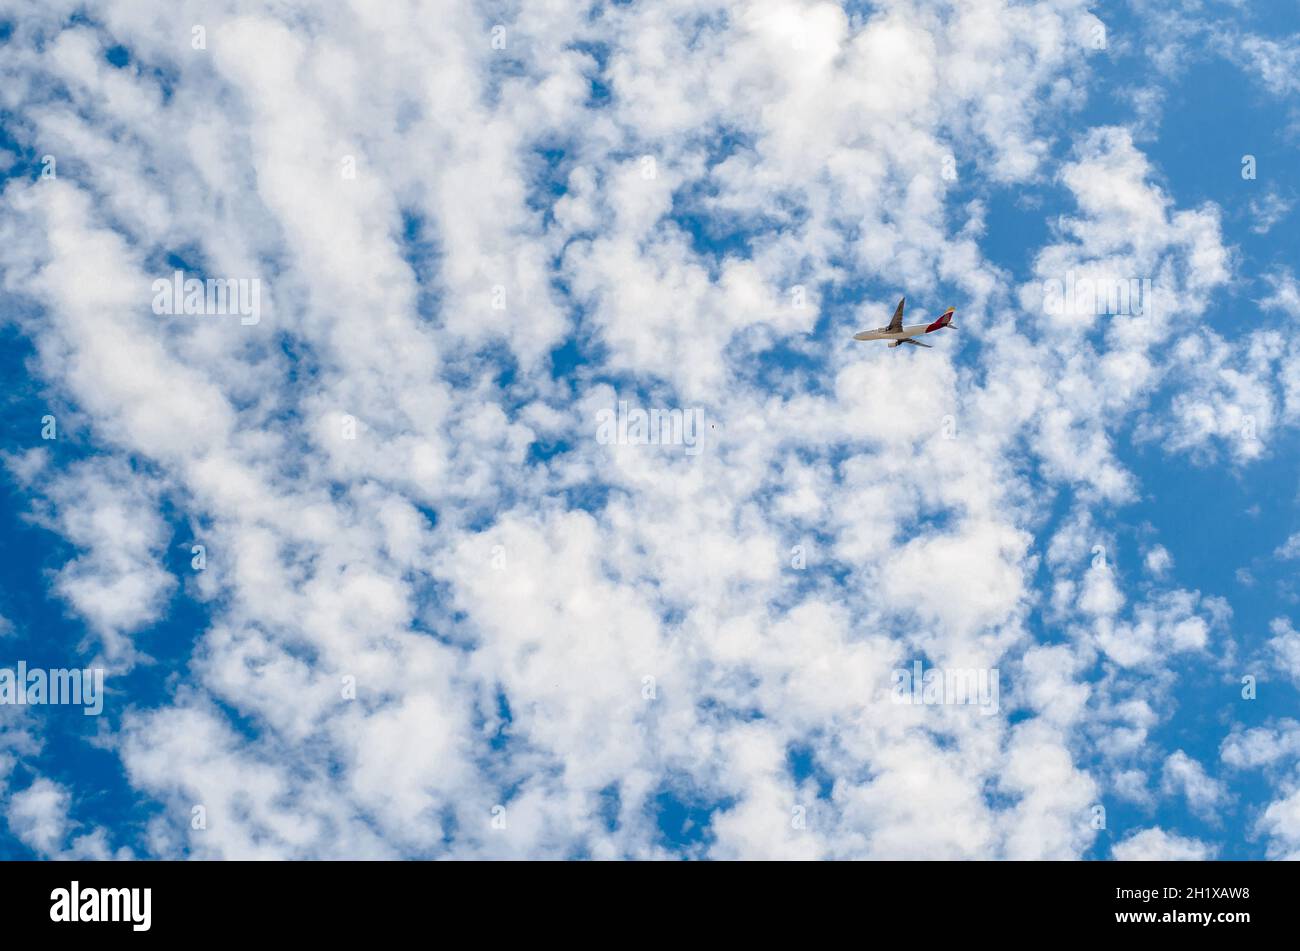 MADRID, SPAIN - JULY 25, 2021: An airplane of the Spanish airline Iberia on a blue sky with white clouds background, after departing from Madrid airpo Stock Photo